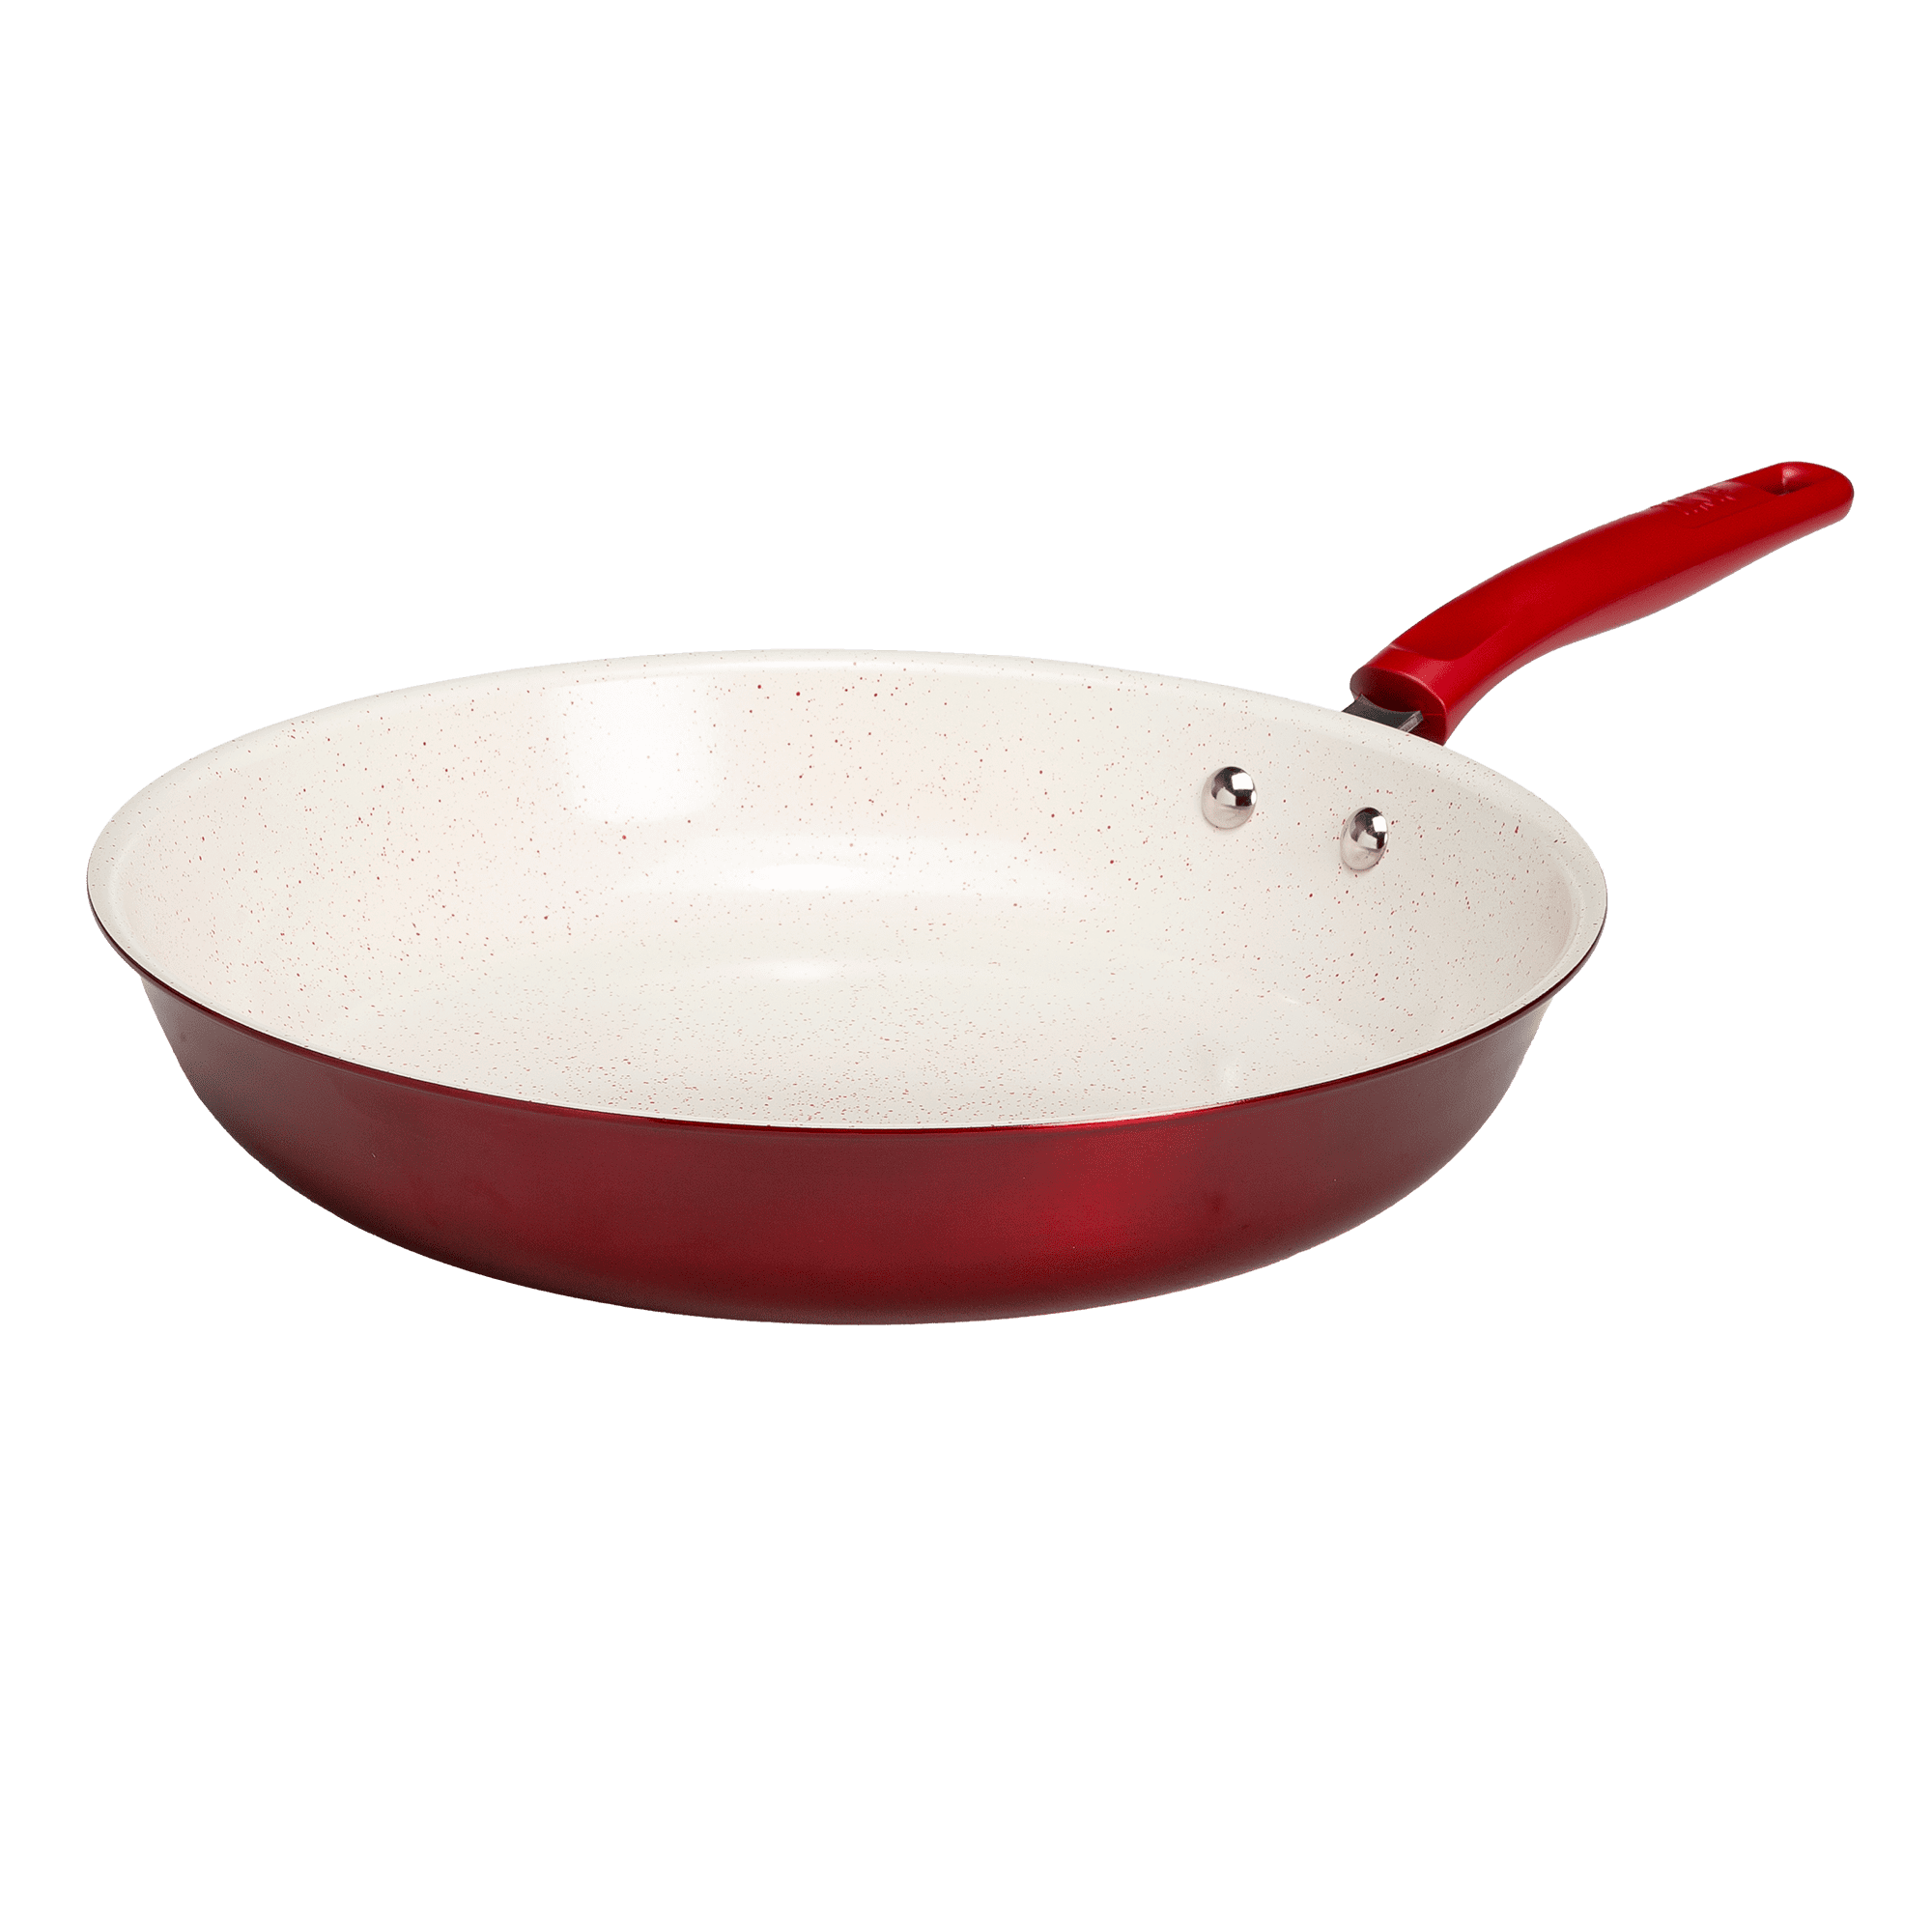 Redchef Ceramic Nonstick Frying Pan with Lid, 12 Inch Non Stick Pan Skillet  with Lid, Healthy Deep Frying Pan Compatible for Omelet Pan and Egg Pan